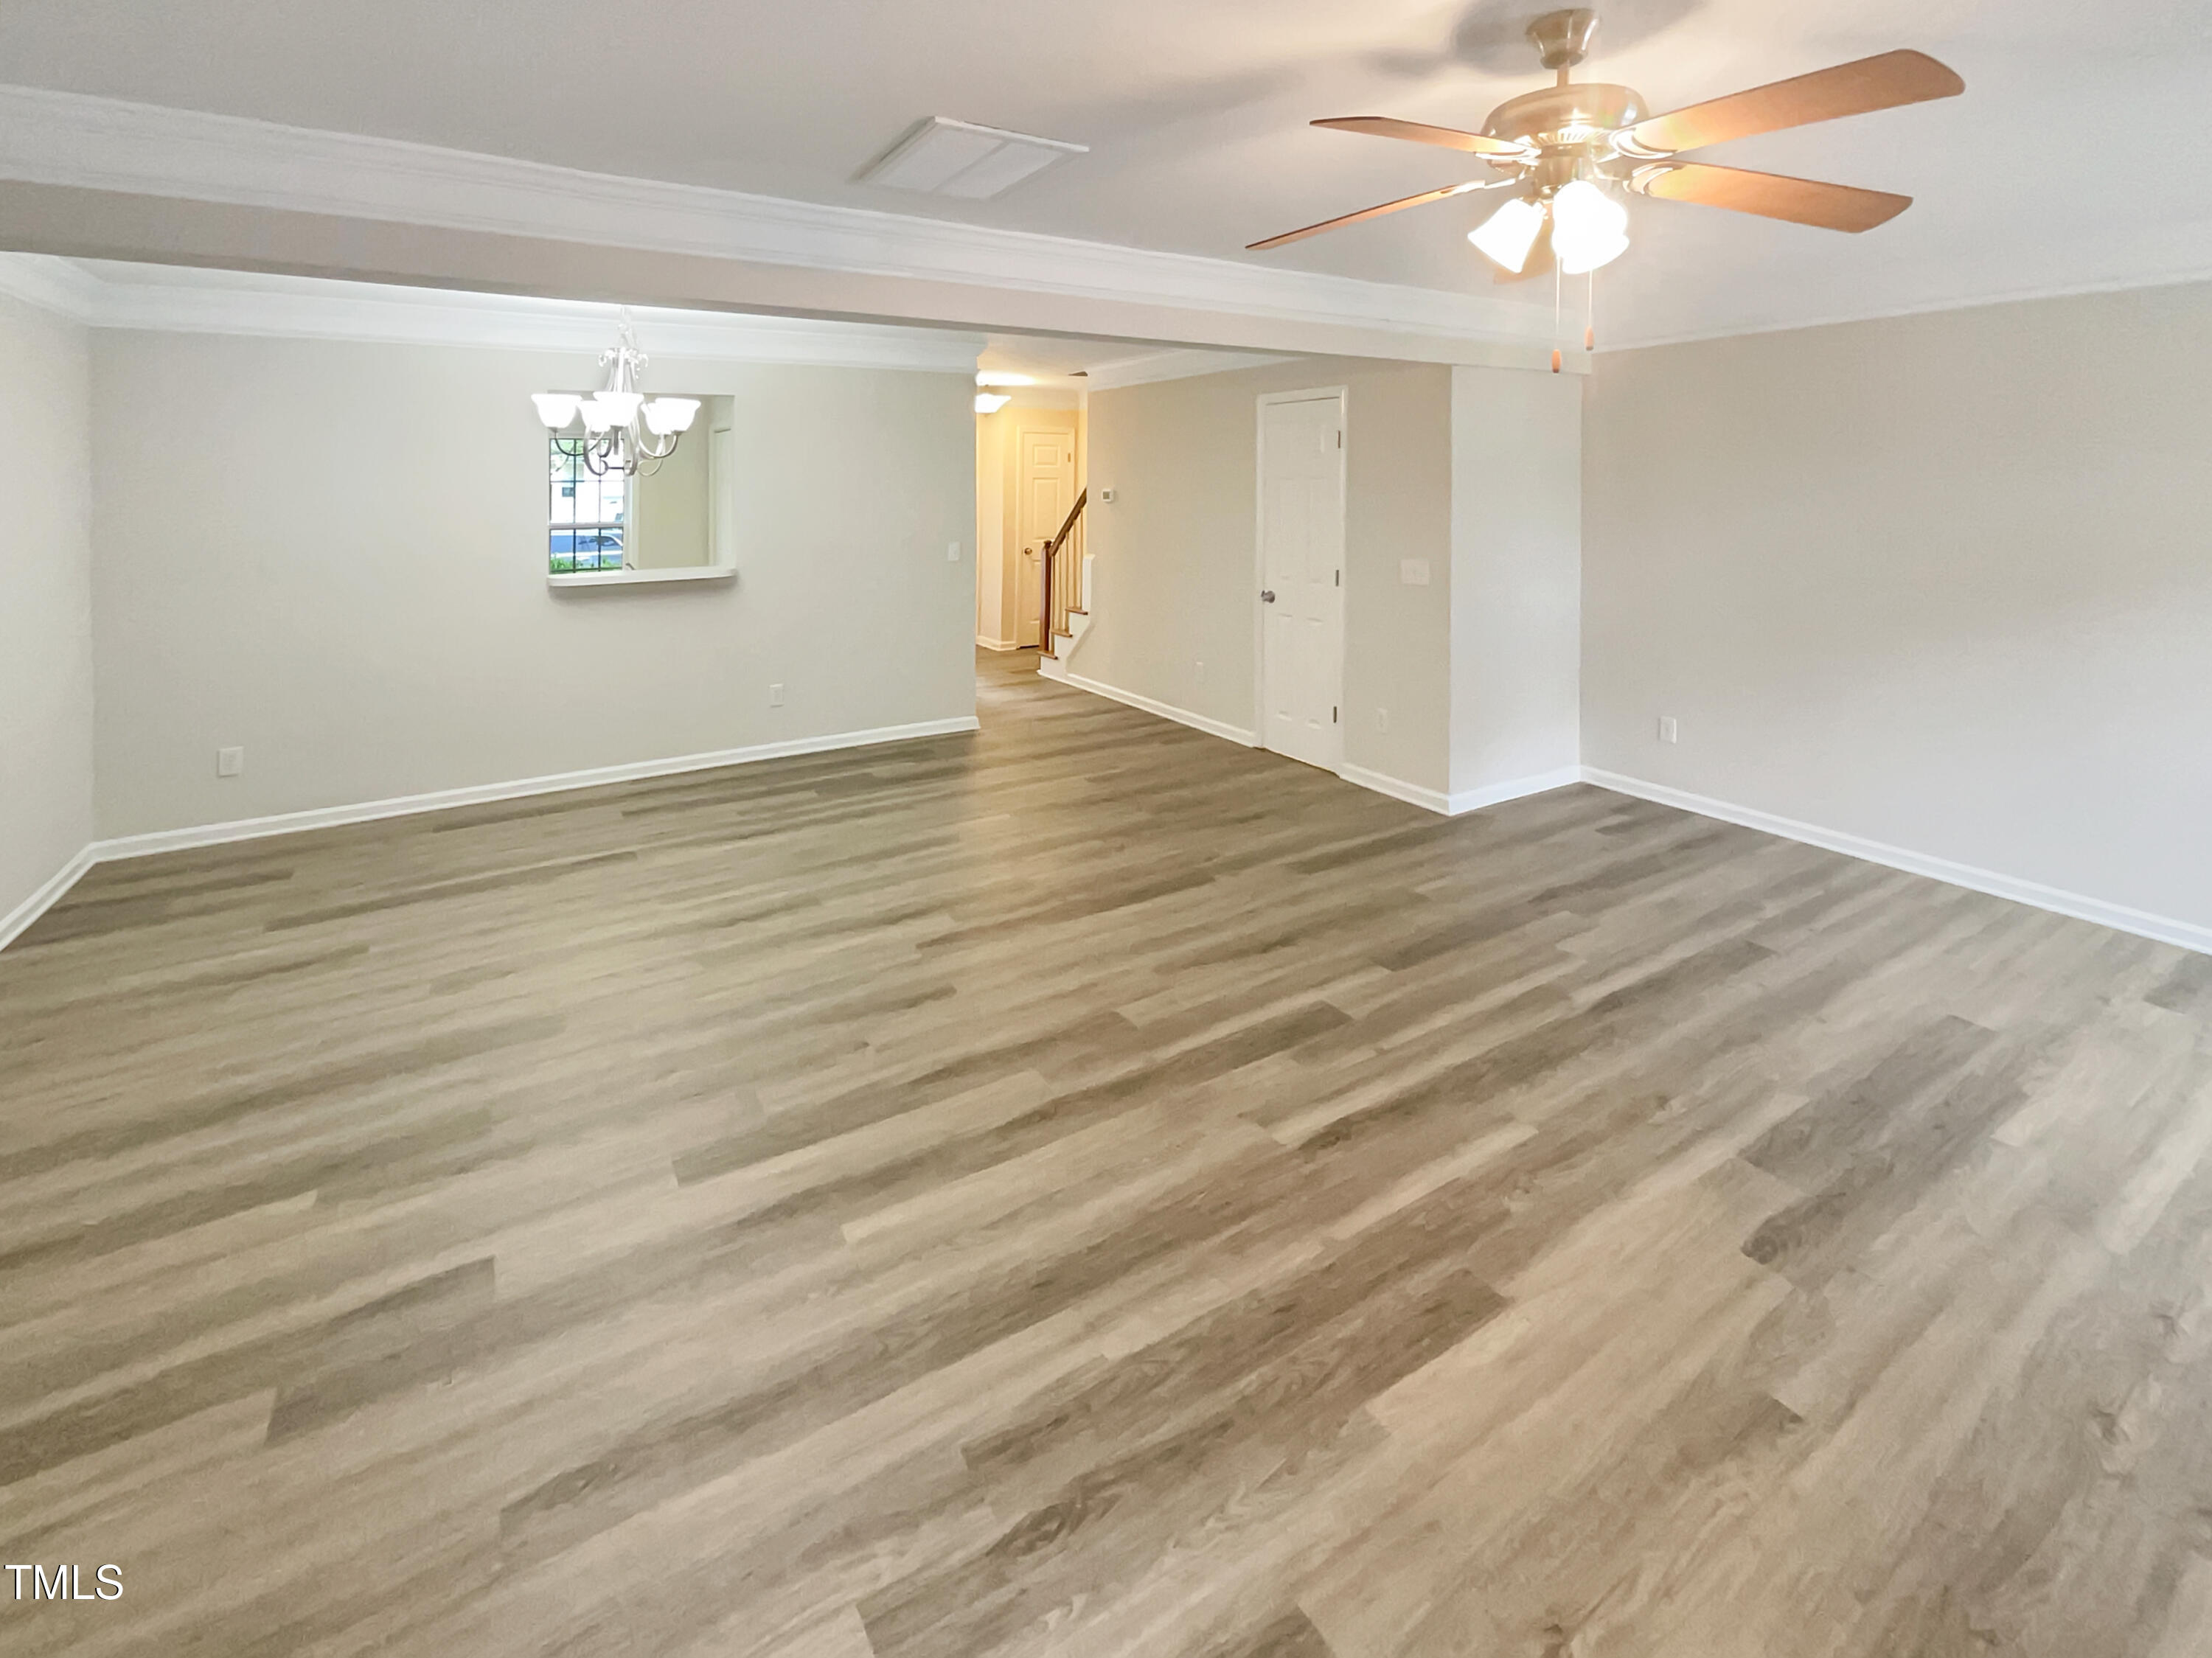 Photo 6 of 16 of 3102 Coxindale Drive townhome